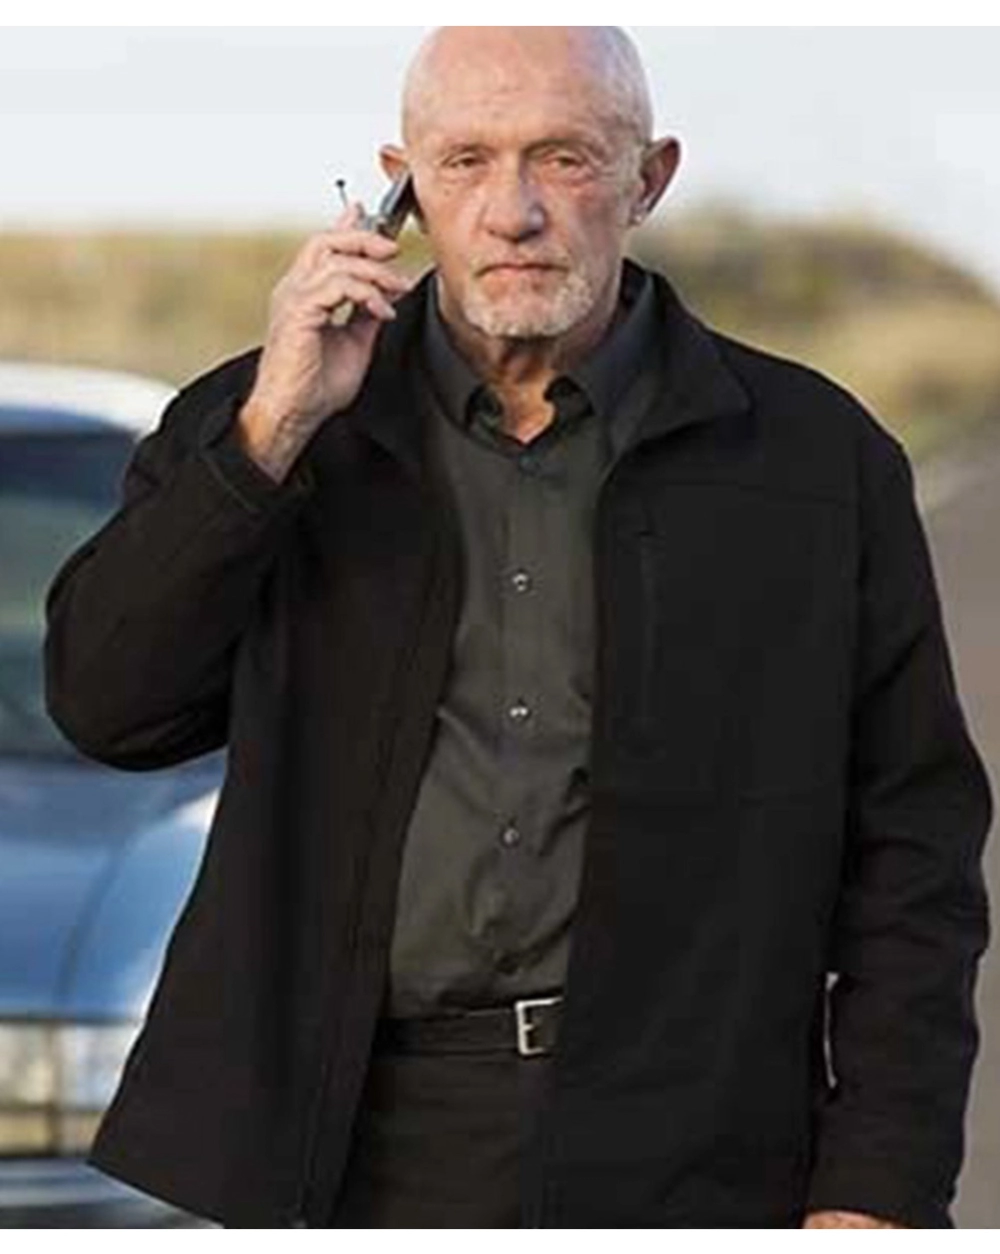 Saul-Mike Better Call Saul Mike Ehrmantraut Cotton Jacket